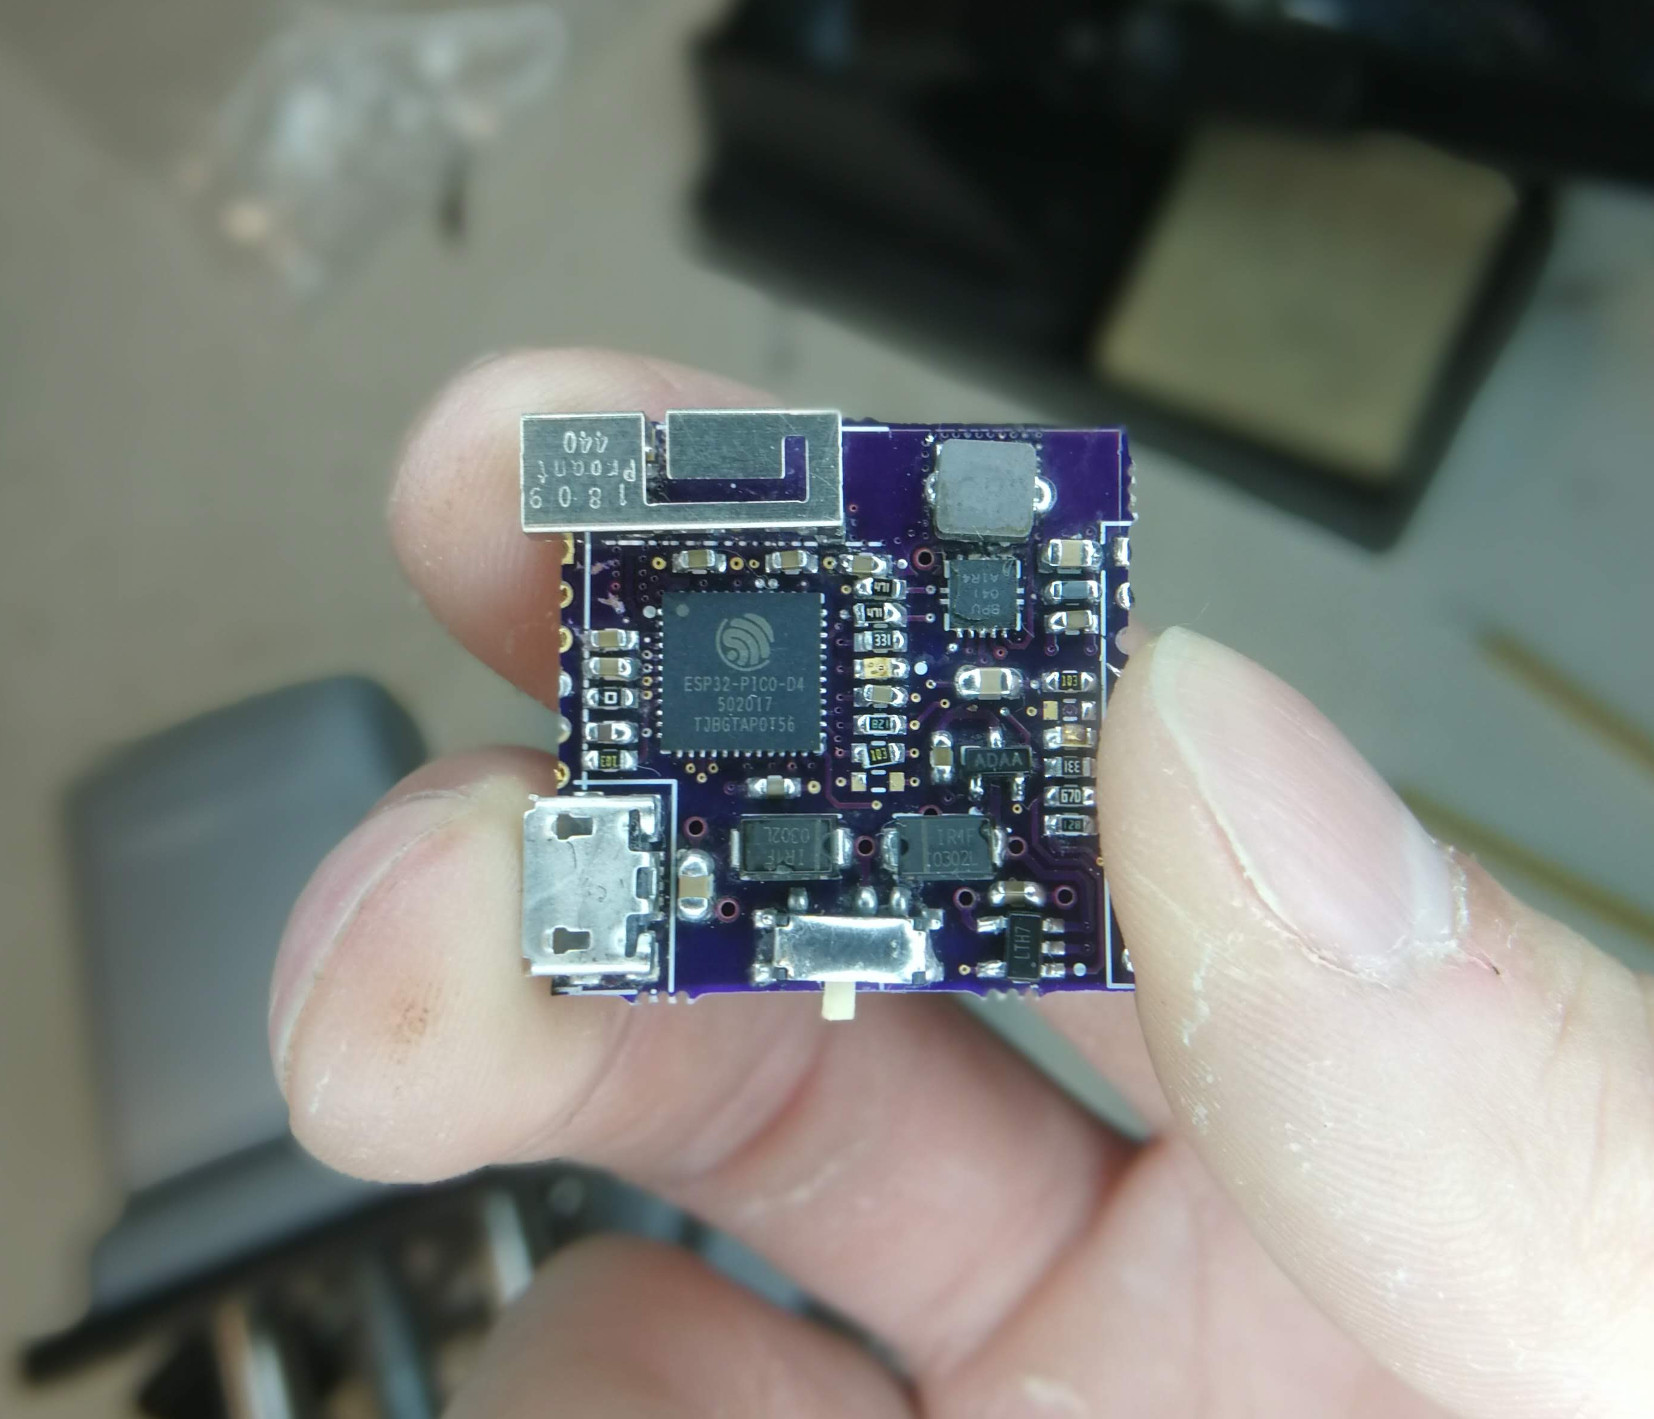 uMesh – A self-contained, battery operated ESP32 module